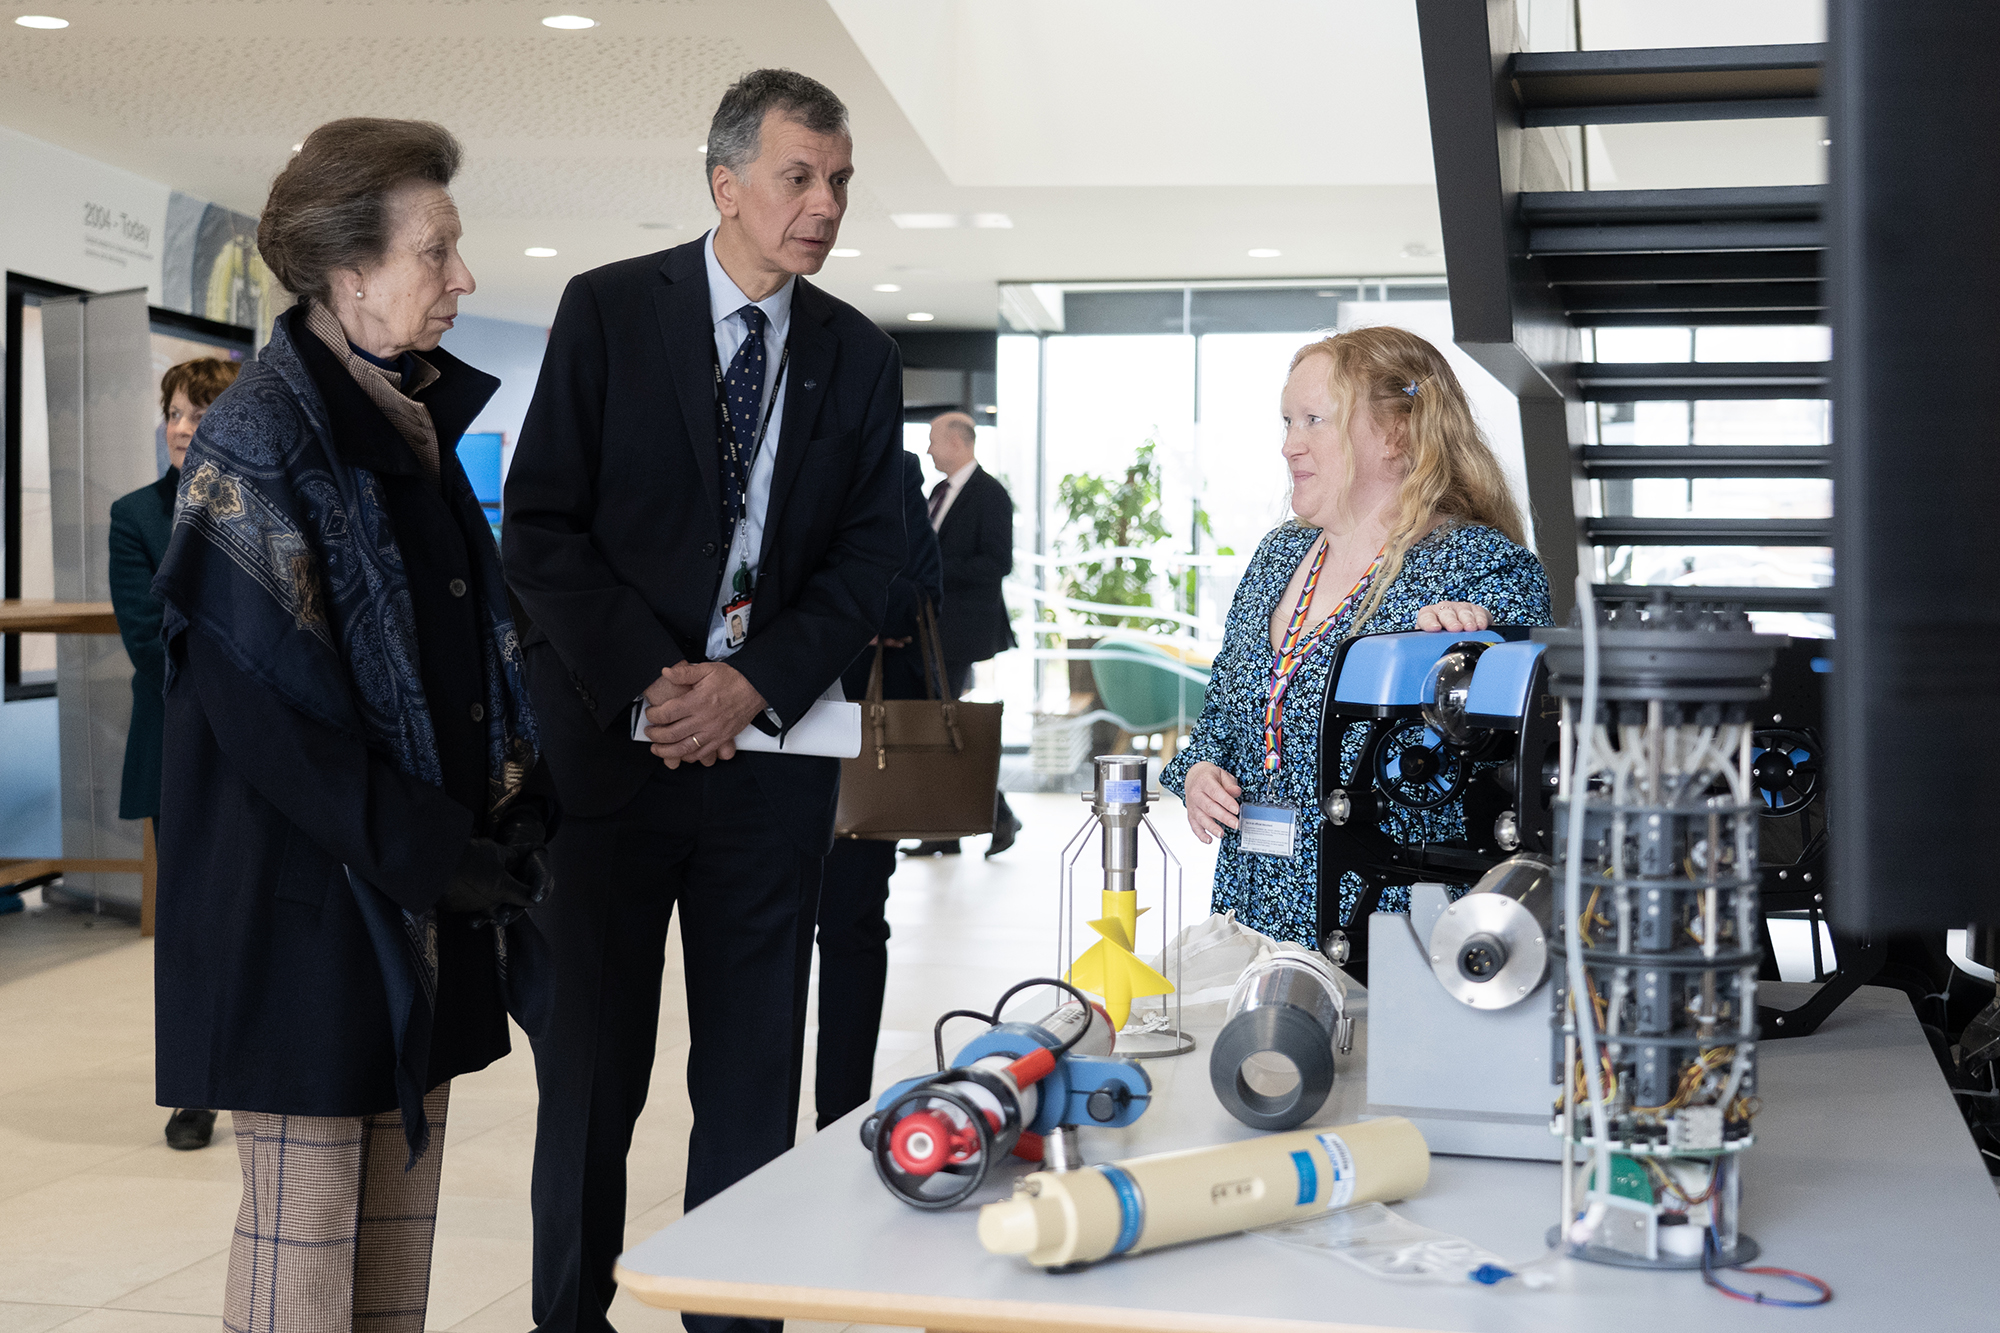 The Princess Royal with Cefas Chief Scientist, Stuart Rogers and Cefas Marine Engineer, Annie Meadows and a demonstration of marine monitoring equipment.